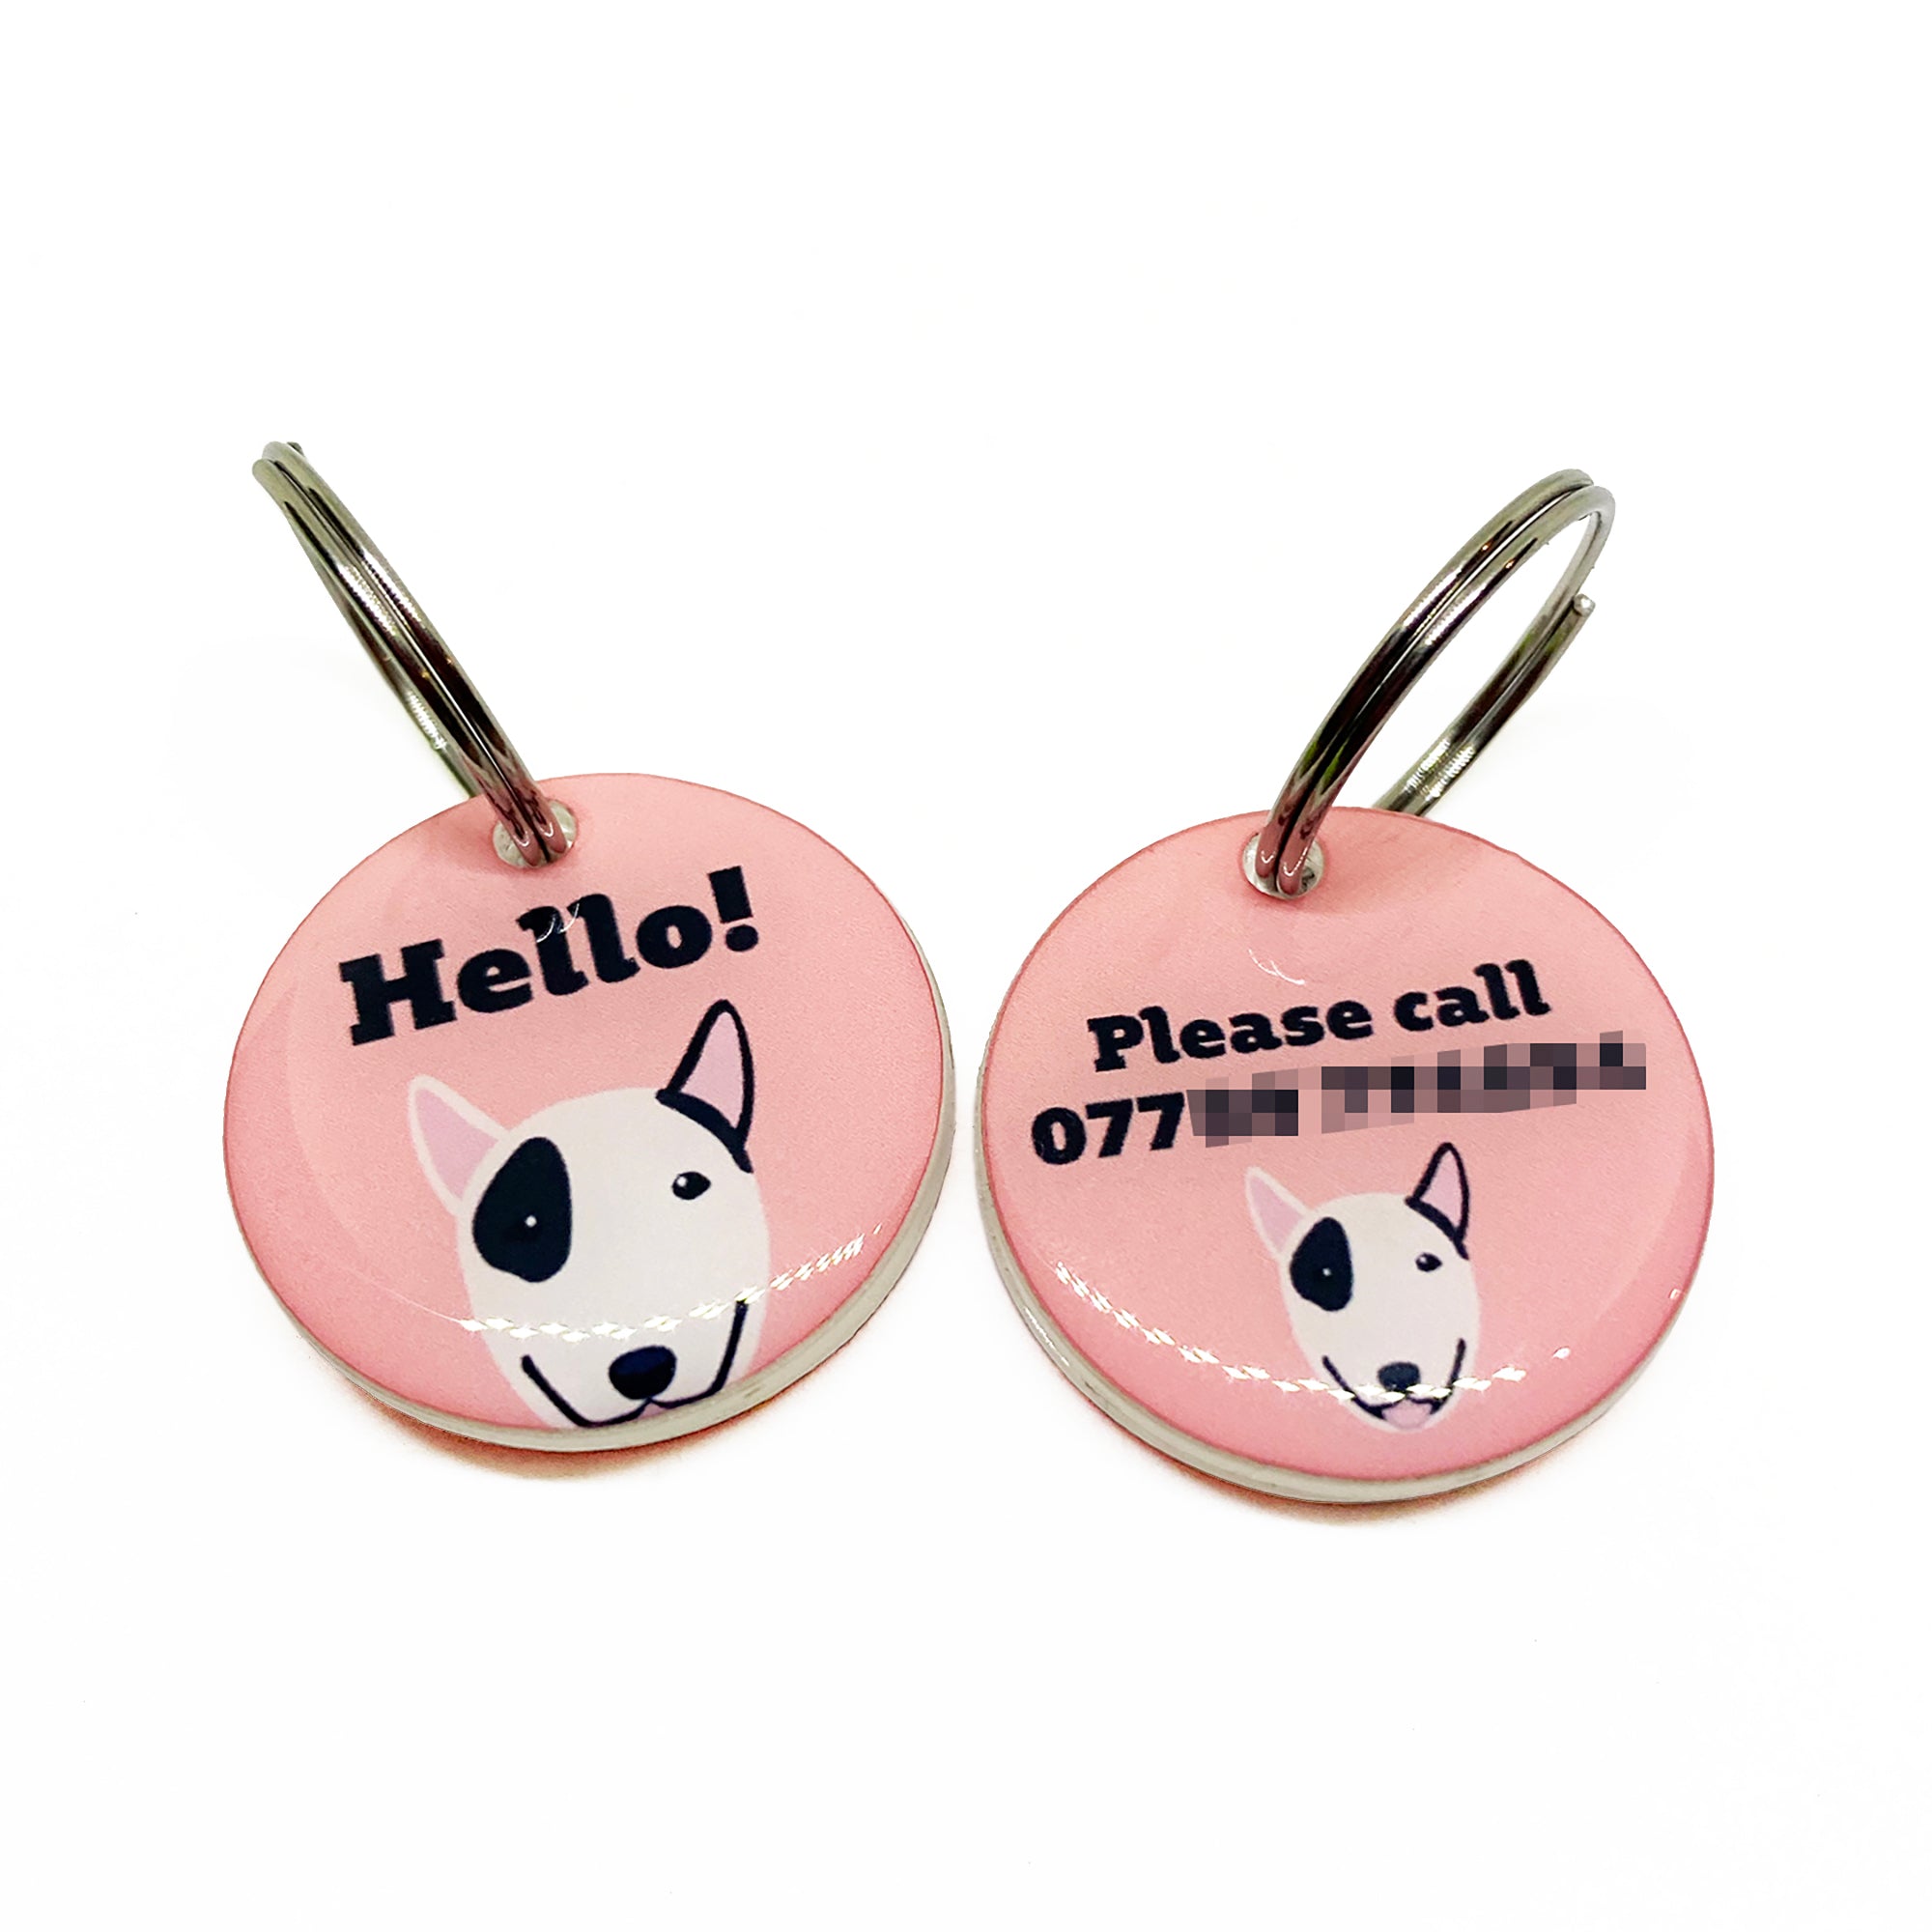 Bull Terrier - 2x Tags Dog Name Tags by Bashtags